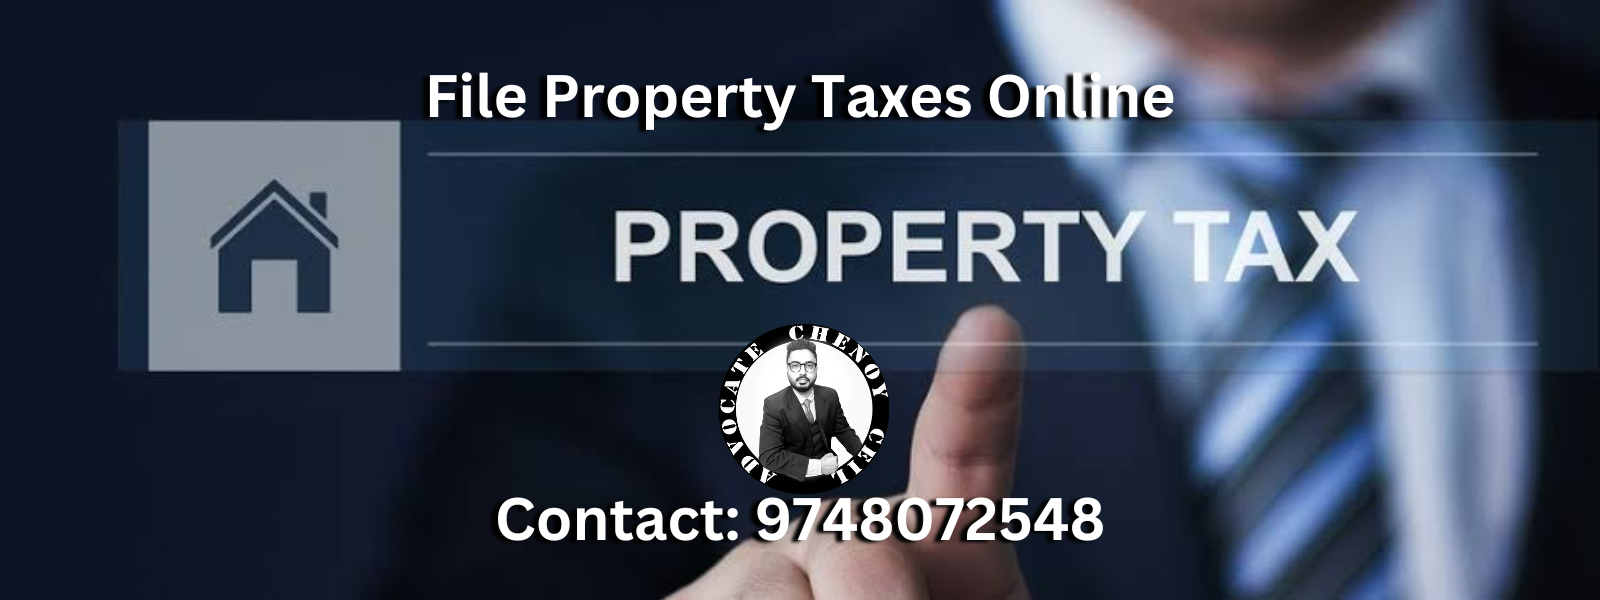 File Property Taxes Online